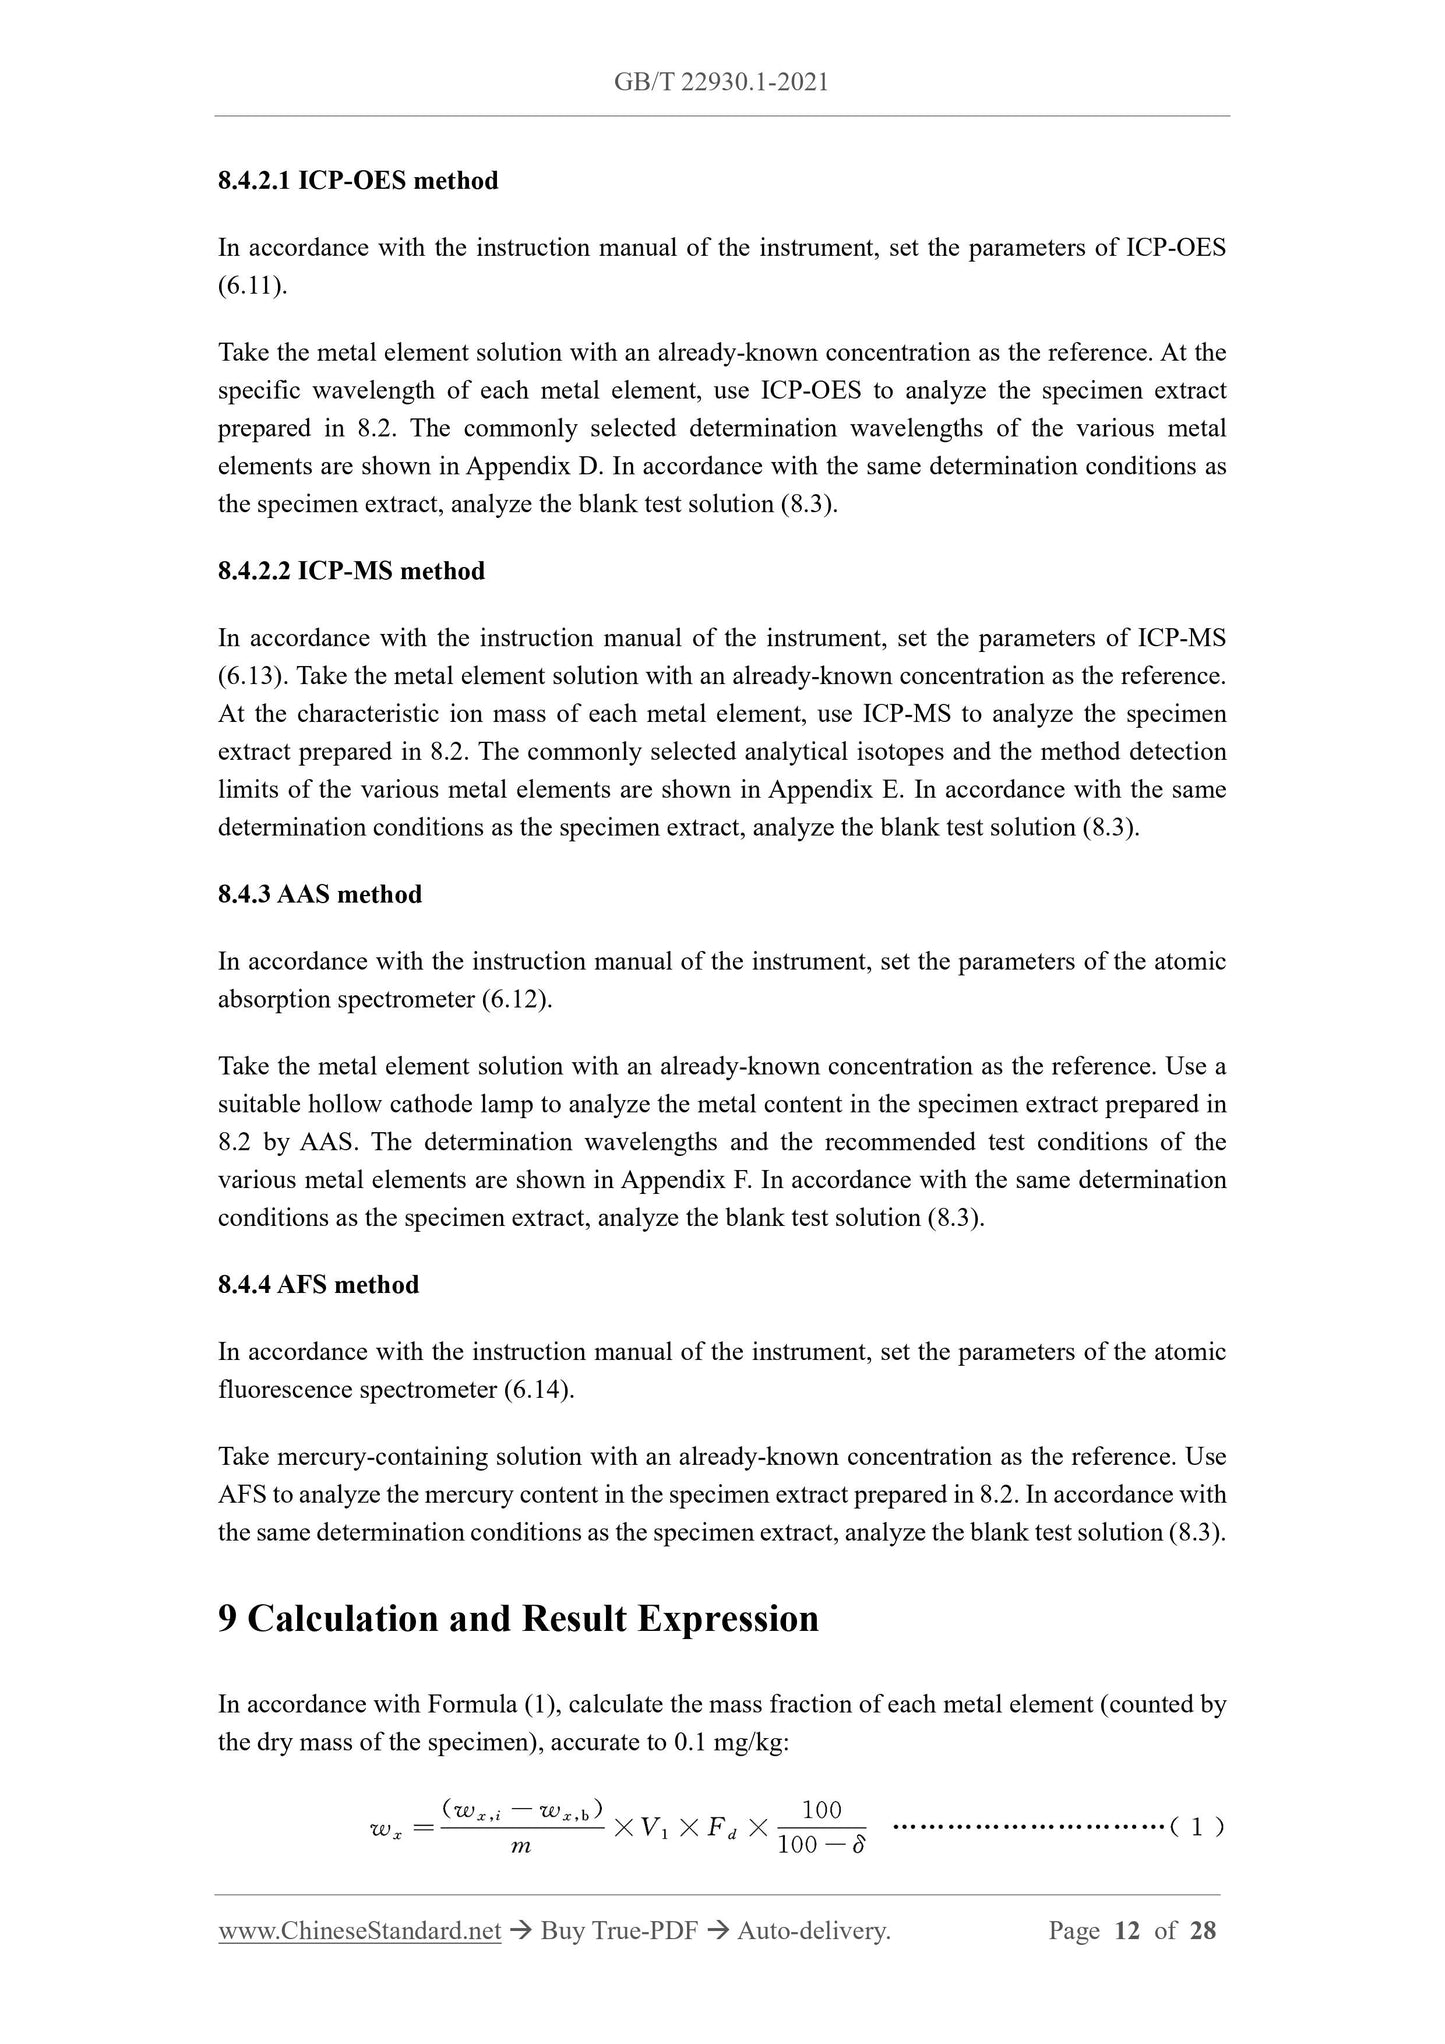 GB/T 22930.1-2021 Page 7